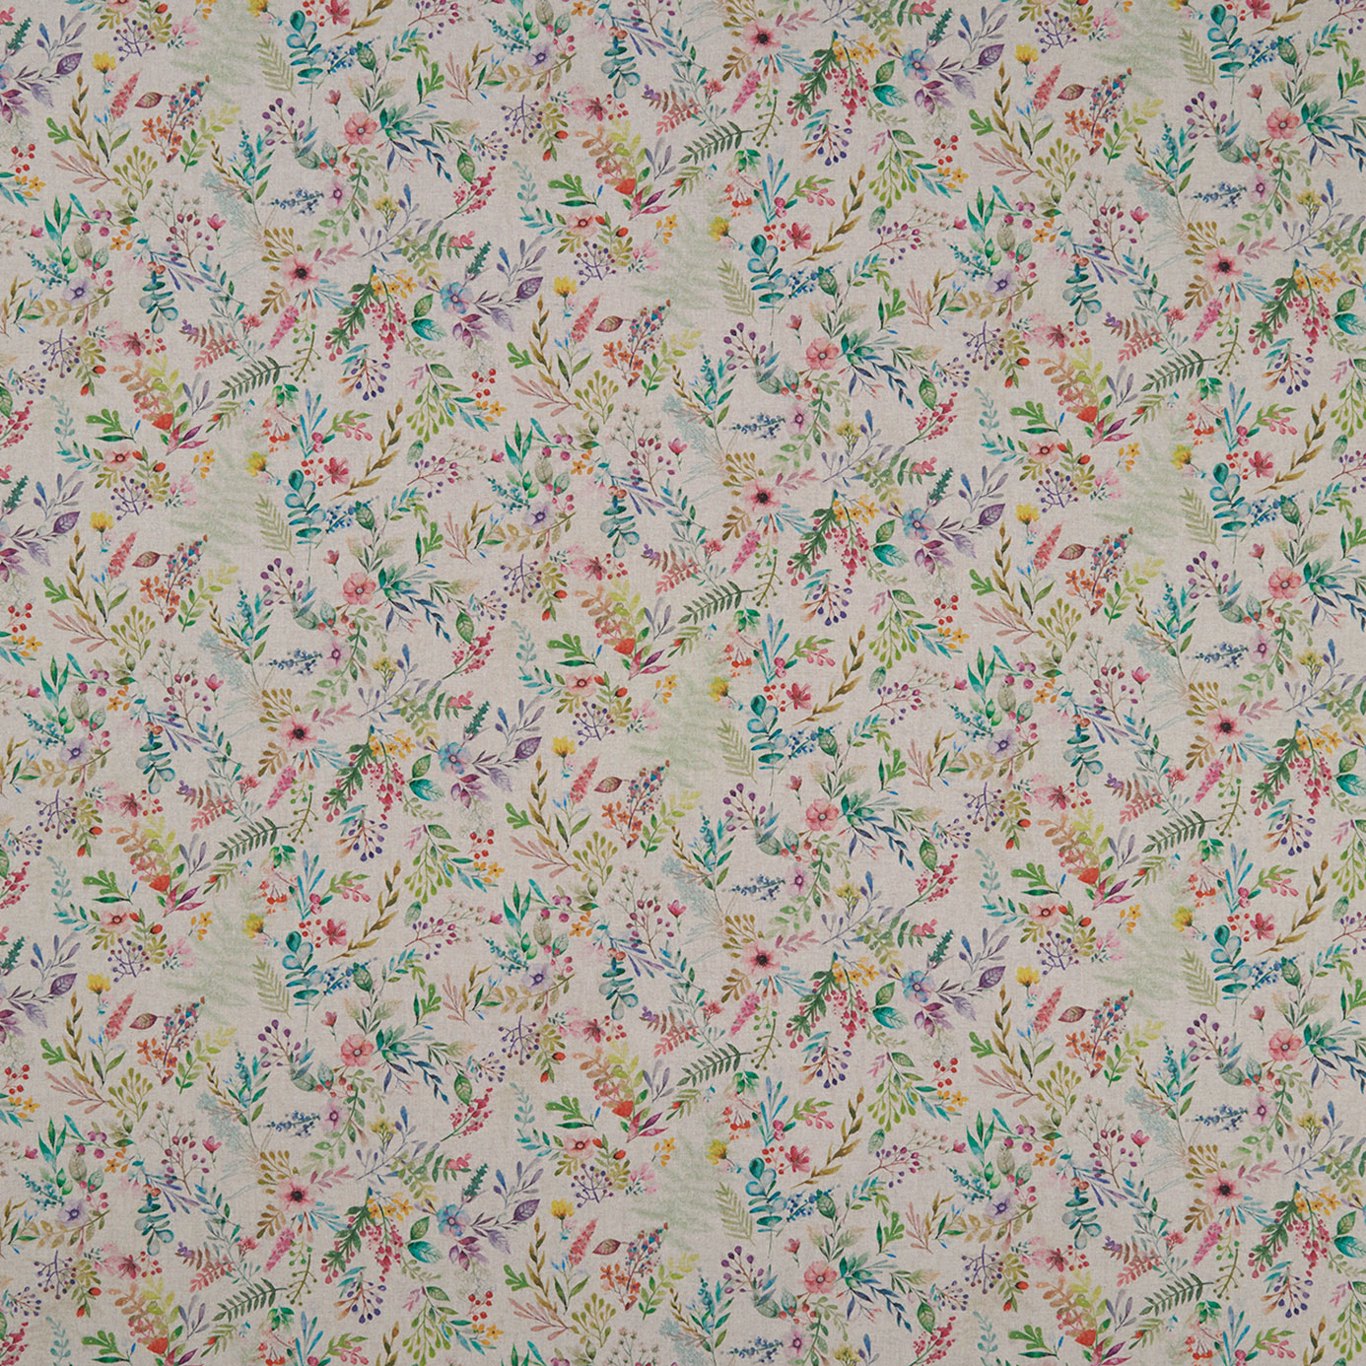 Forget Me Not Linen Fabric by STG